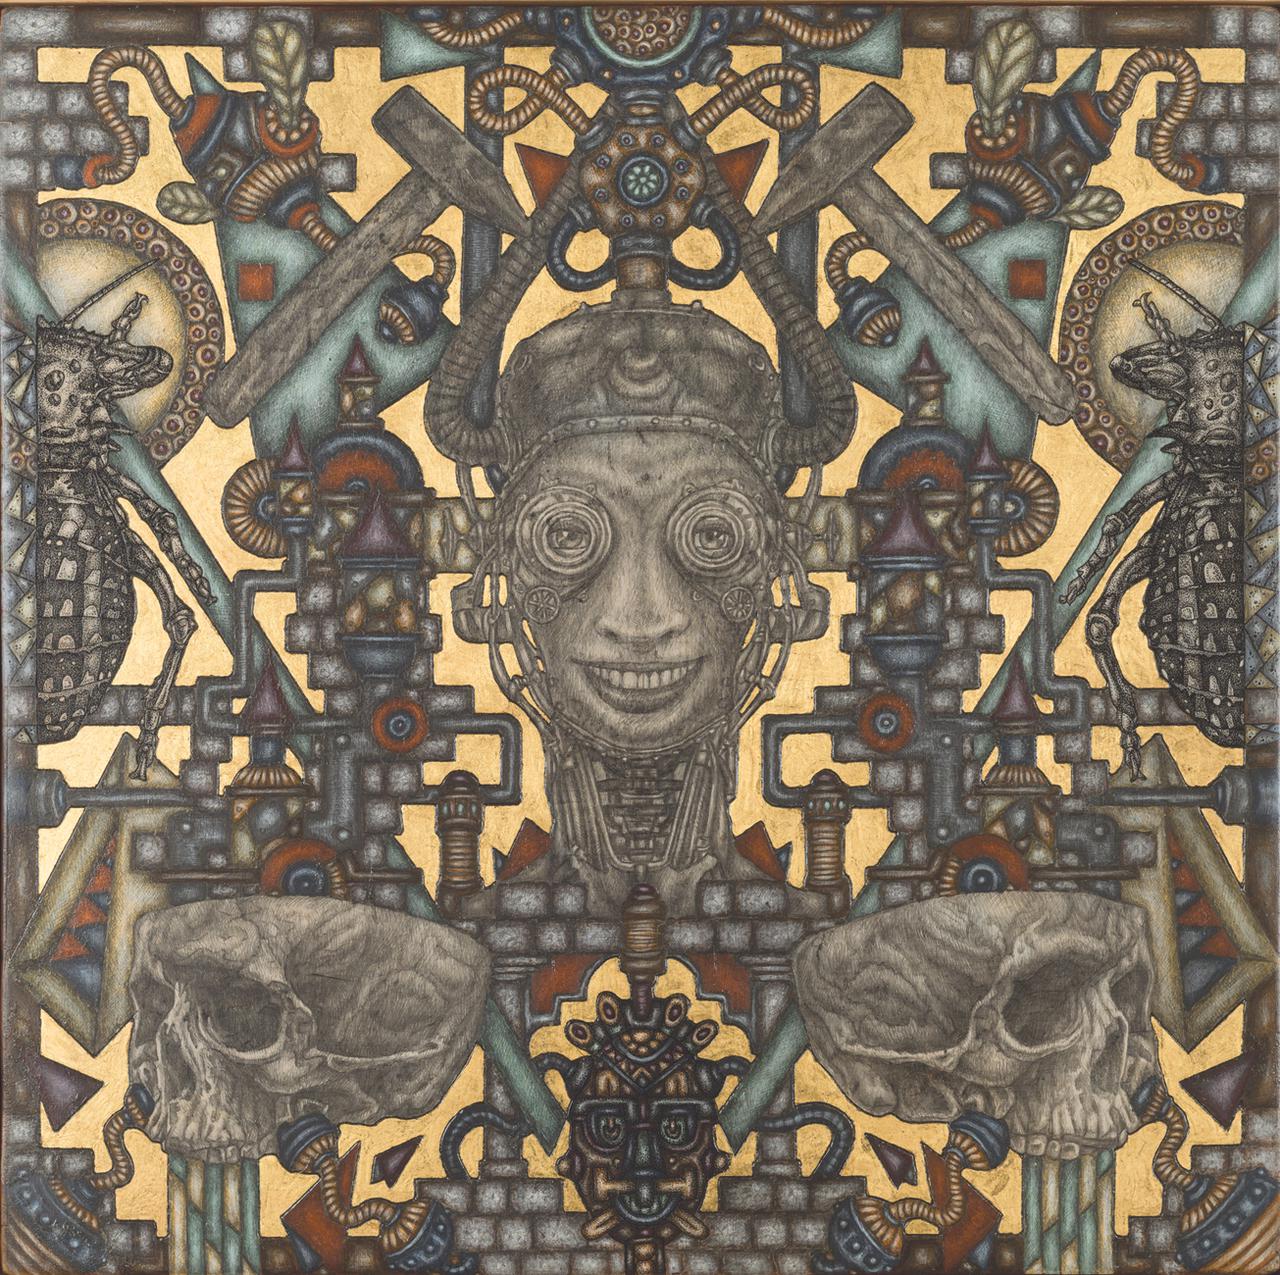 Homo Faber’s Maze, 35.5 cm x 35.5 cm, acrylics, pencil, ink and gold 22K, on wood, 2018